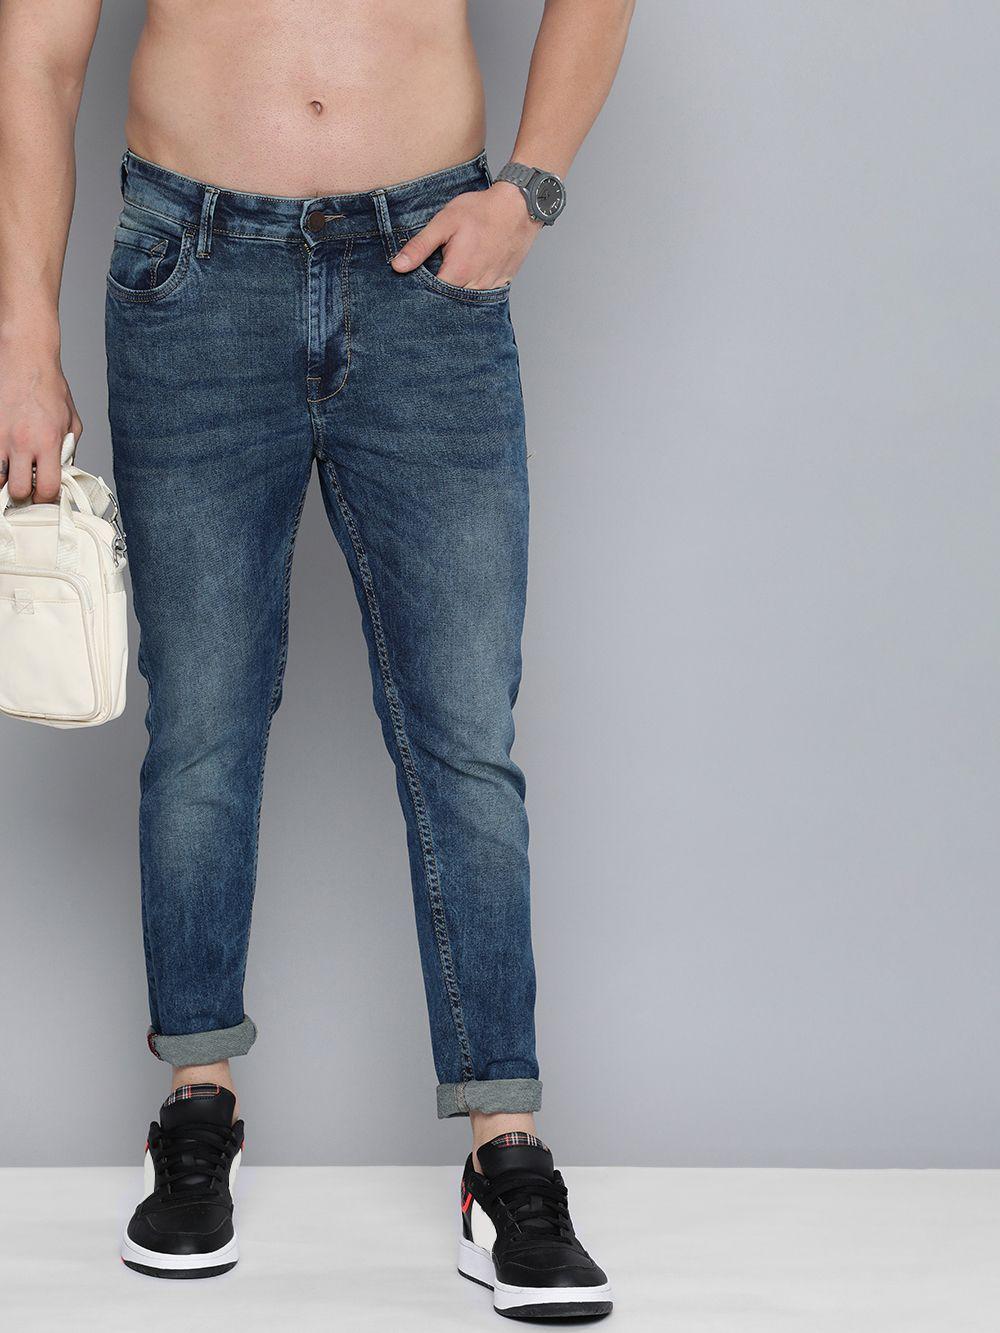 here&now-men-tapered-fit-heavy-fade-stretchable-jeans